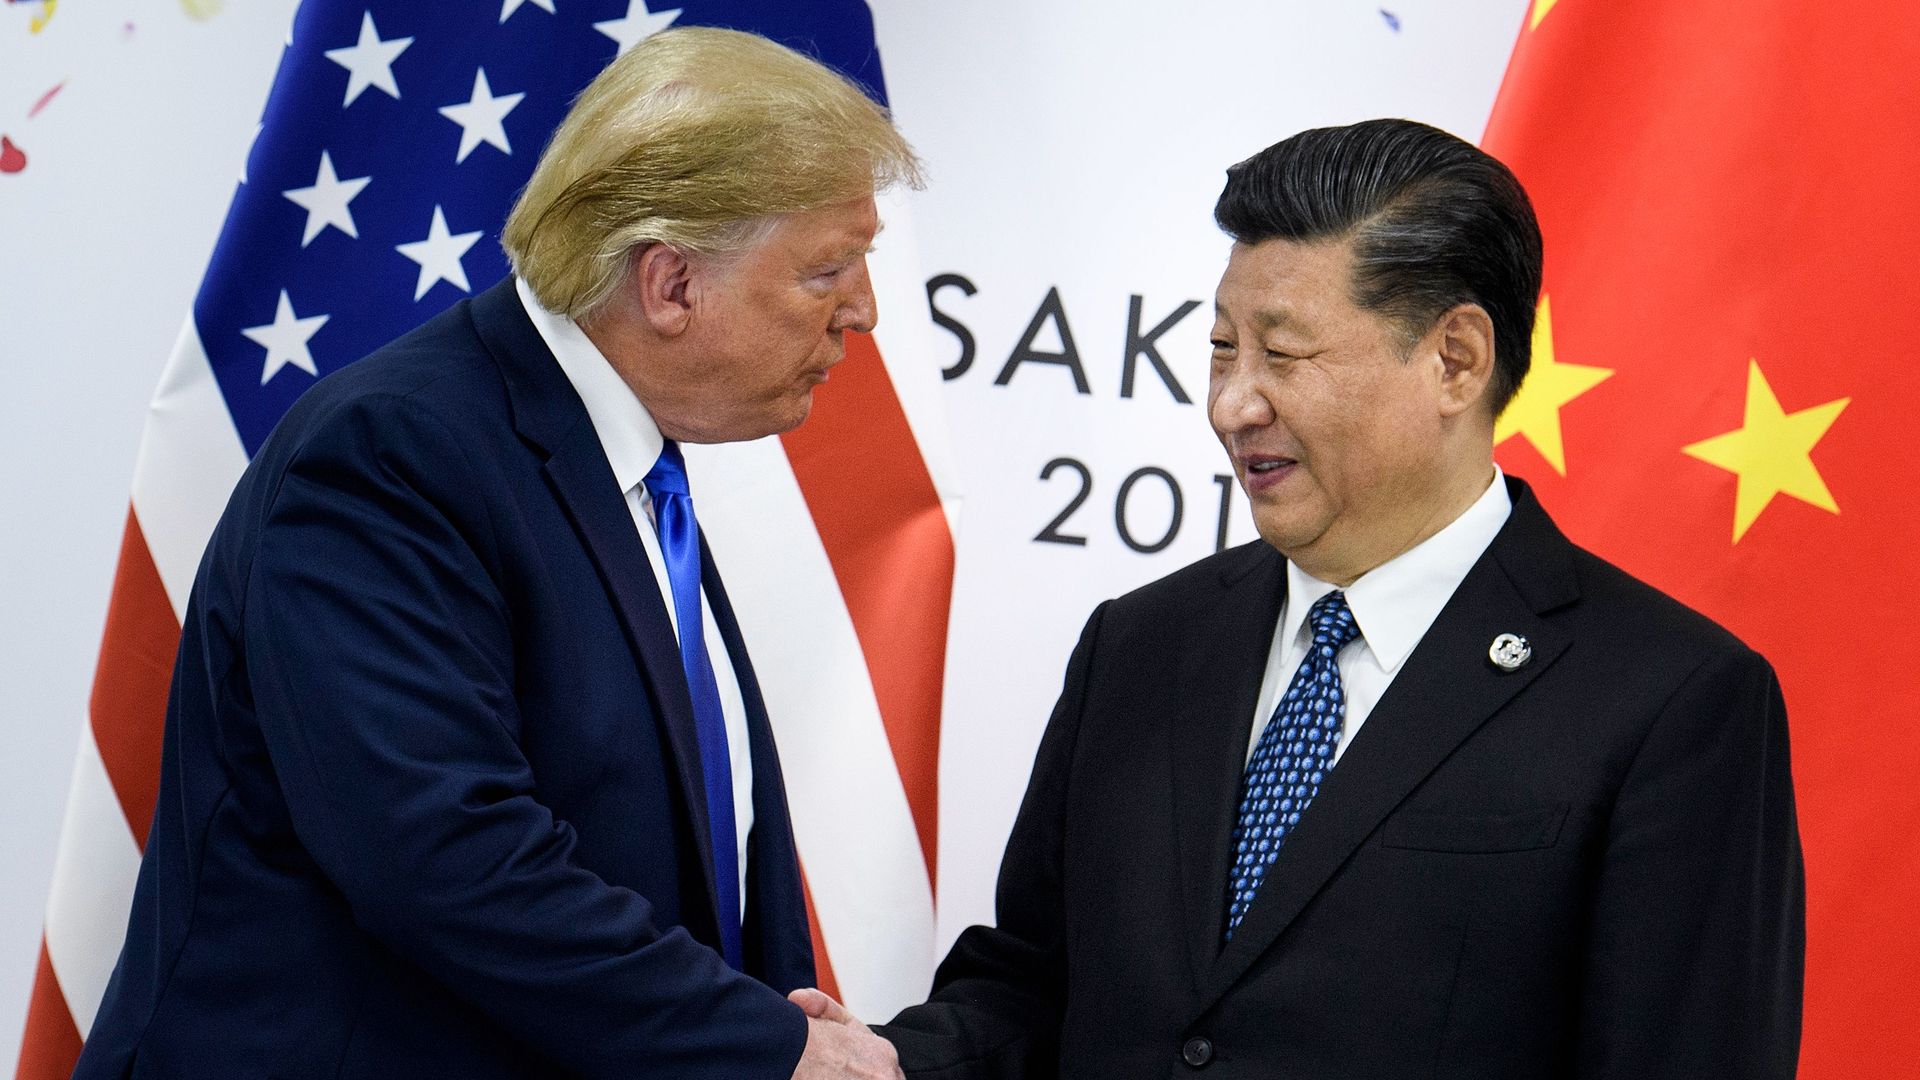 Trump and Chinese President Xi Jingping. Photo: BRENDAN SMIALOWSKI/AFP via Getty Images.